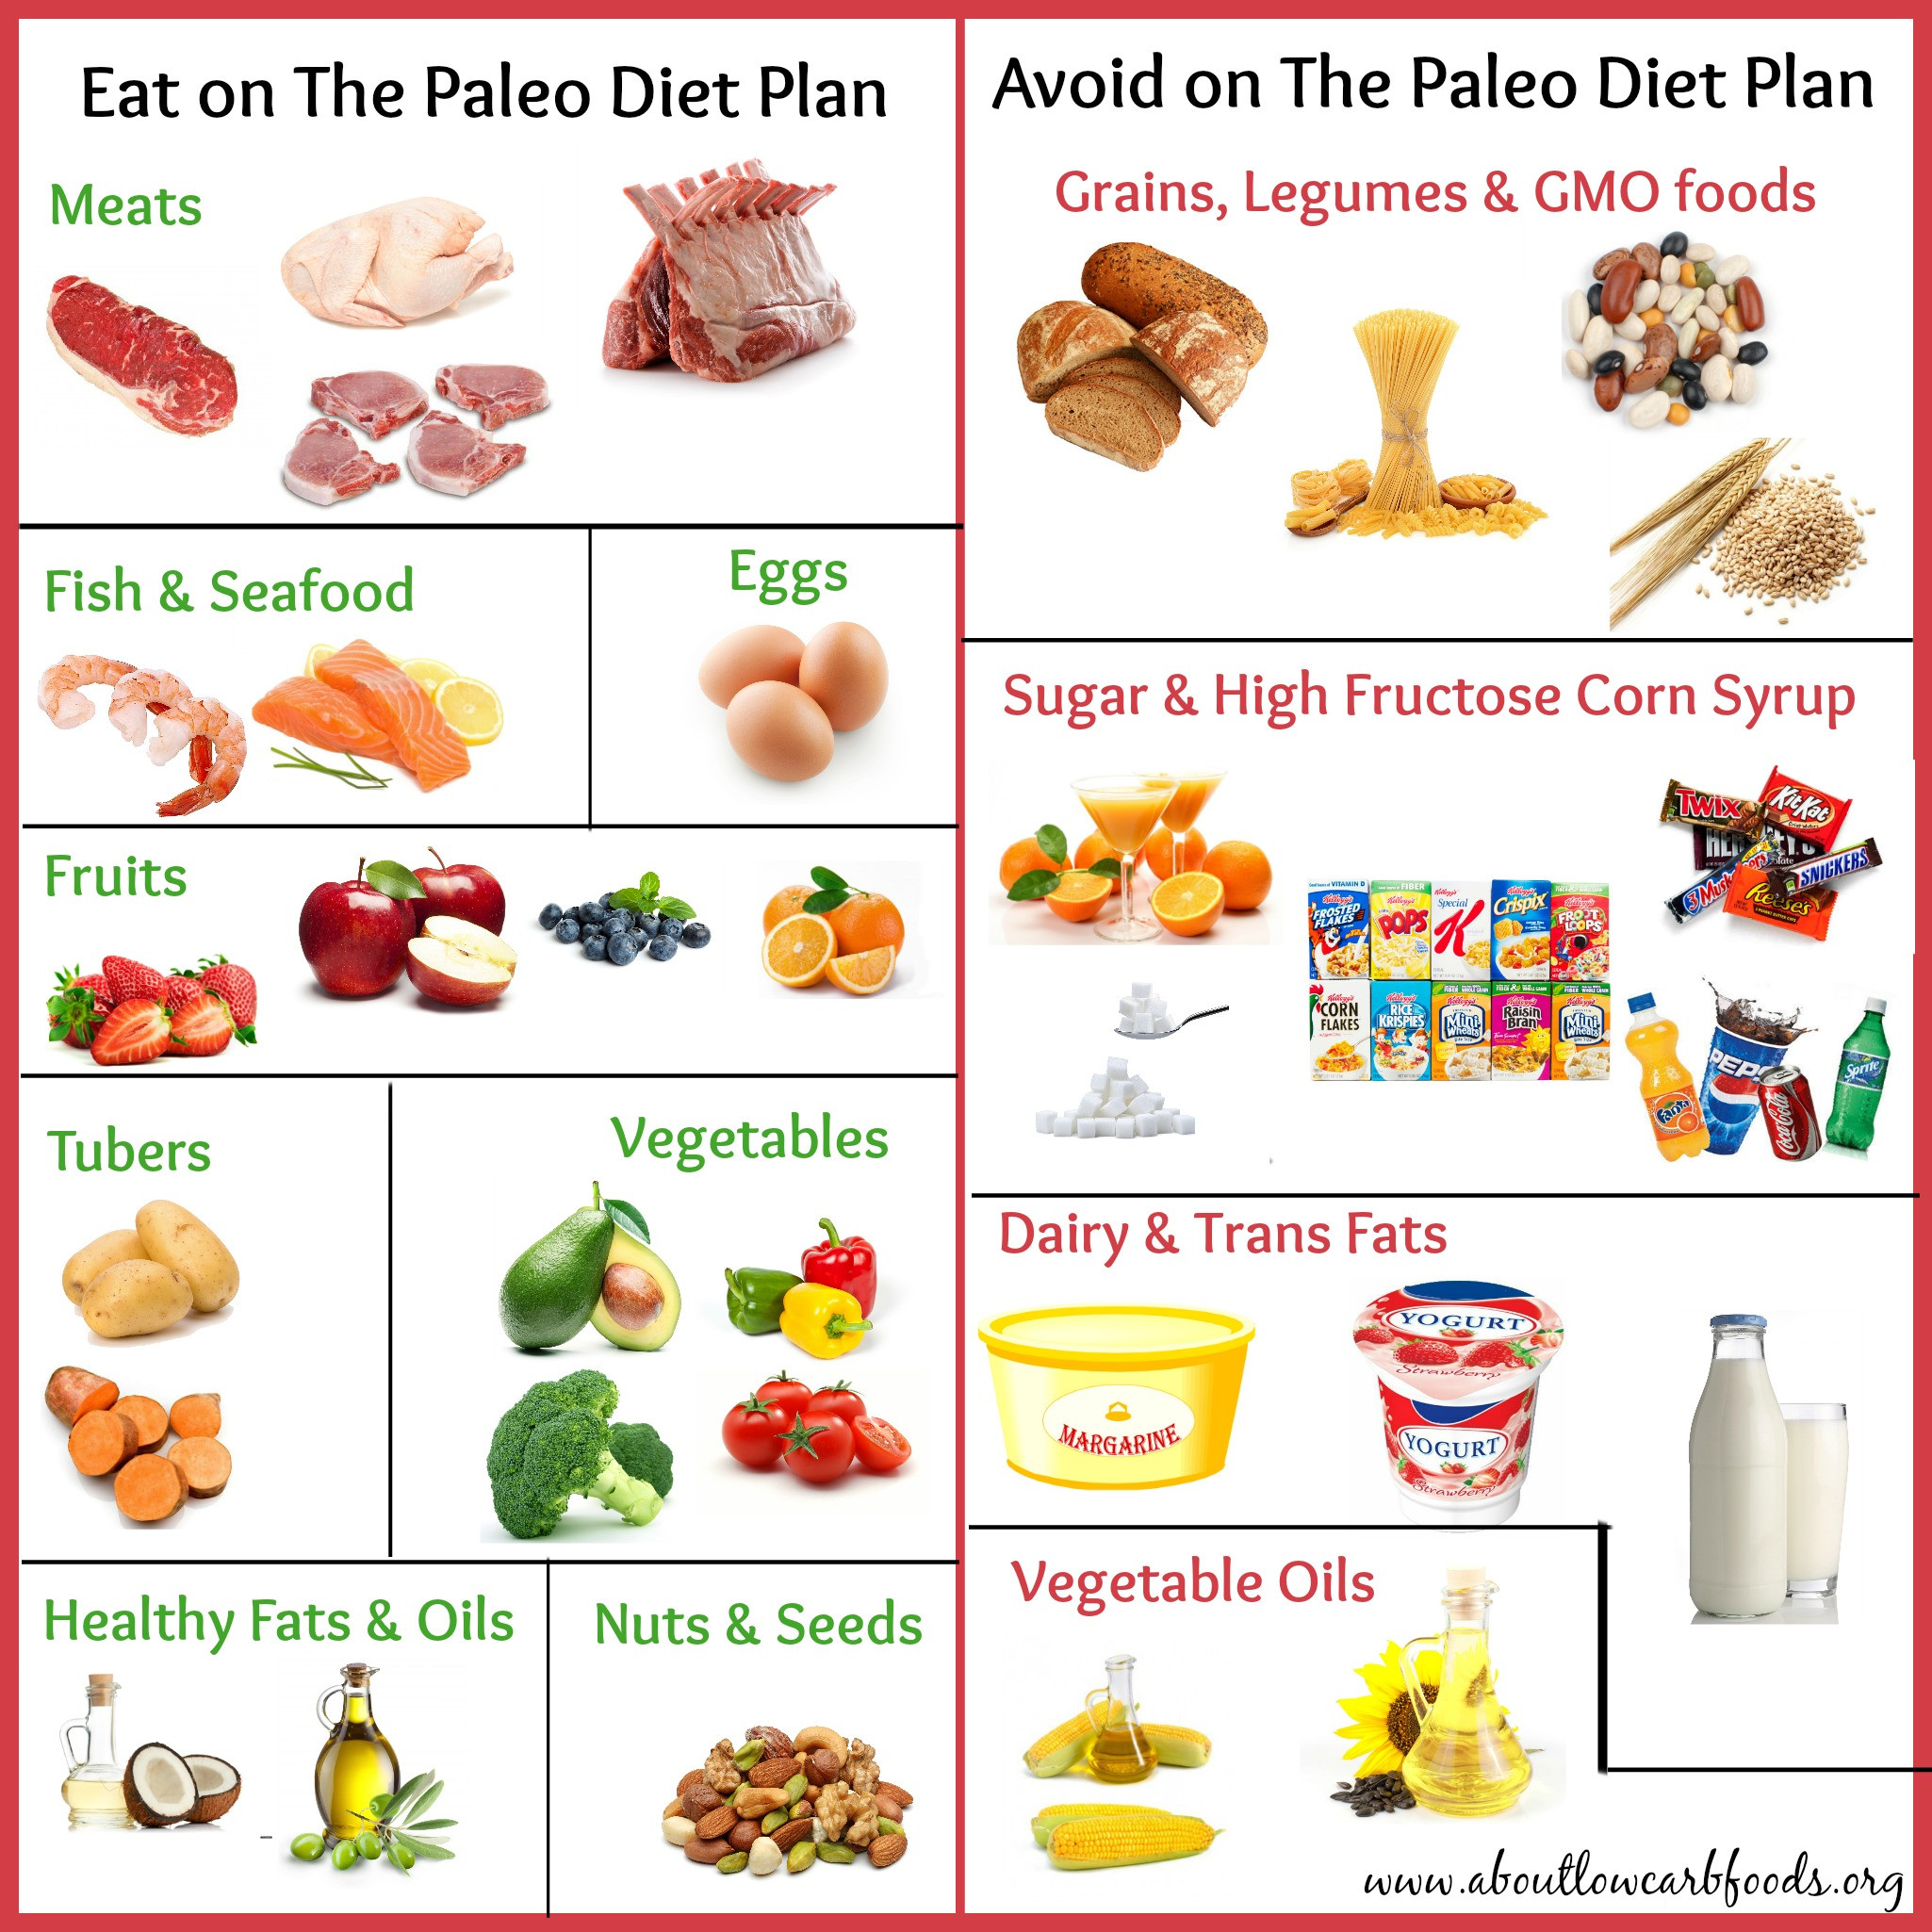 Foods In The Paleo Diet
 7 Myths About The Paleo Diet The Caveman s Way of Eating